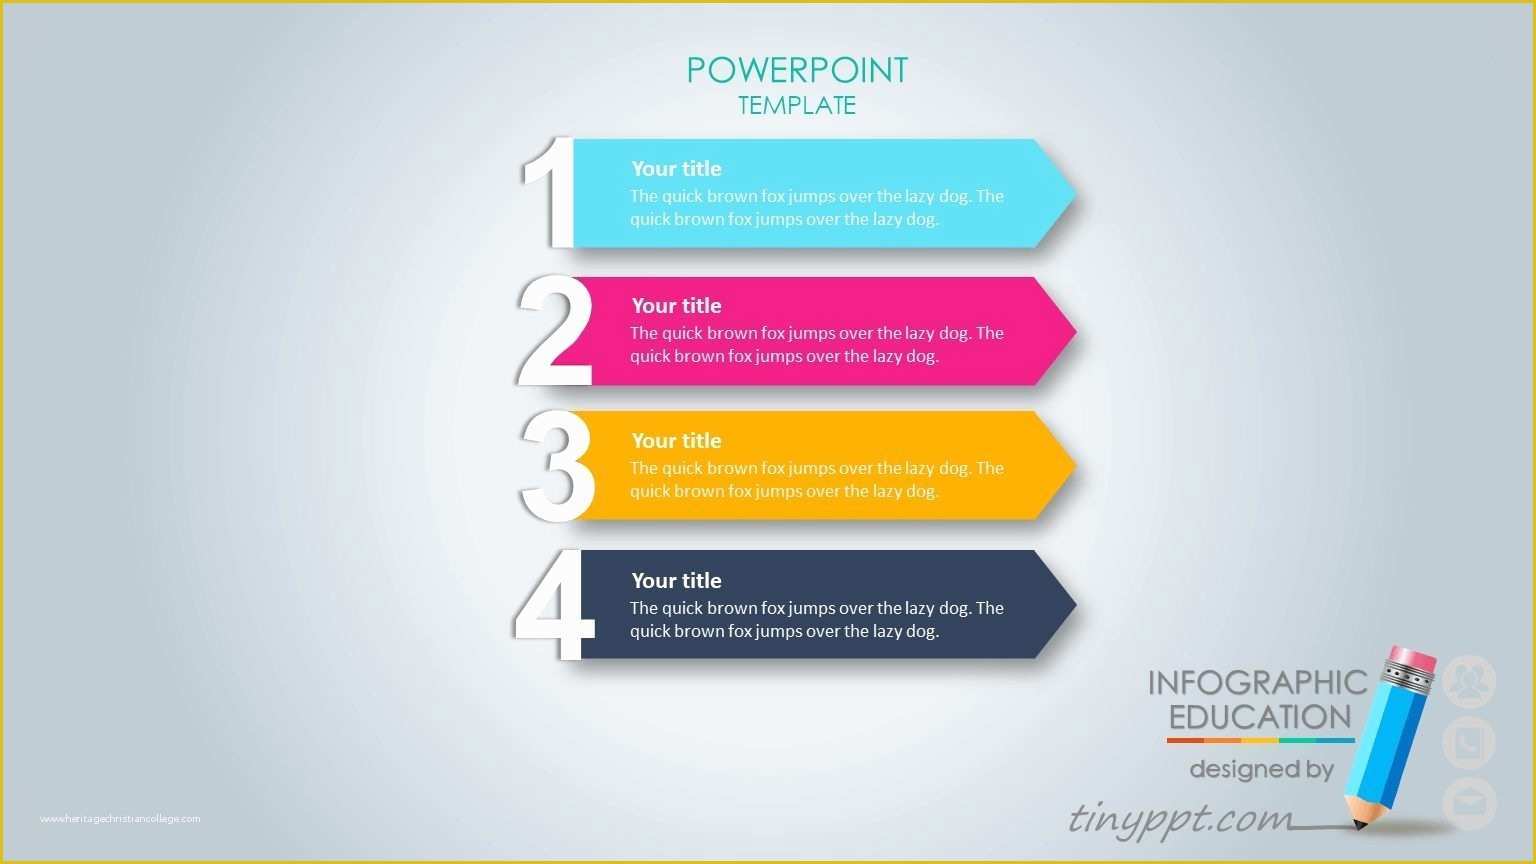 Powerpoint Templates Free Download 2018 Of Ppt Templates Free Download Business Presentation 2018